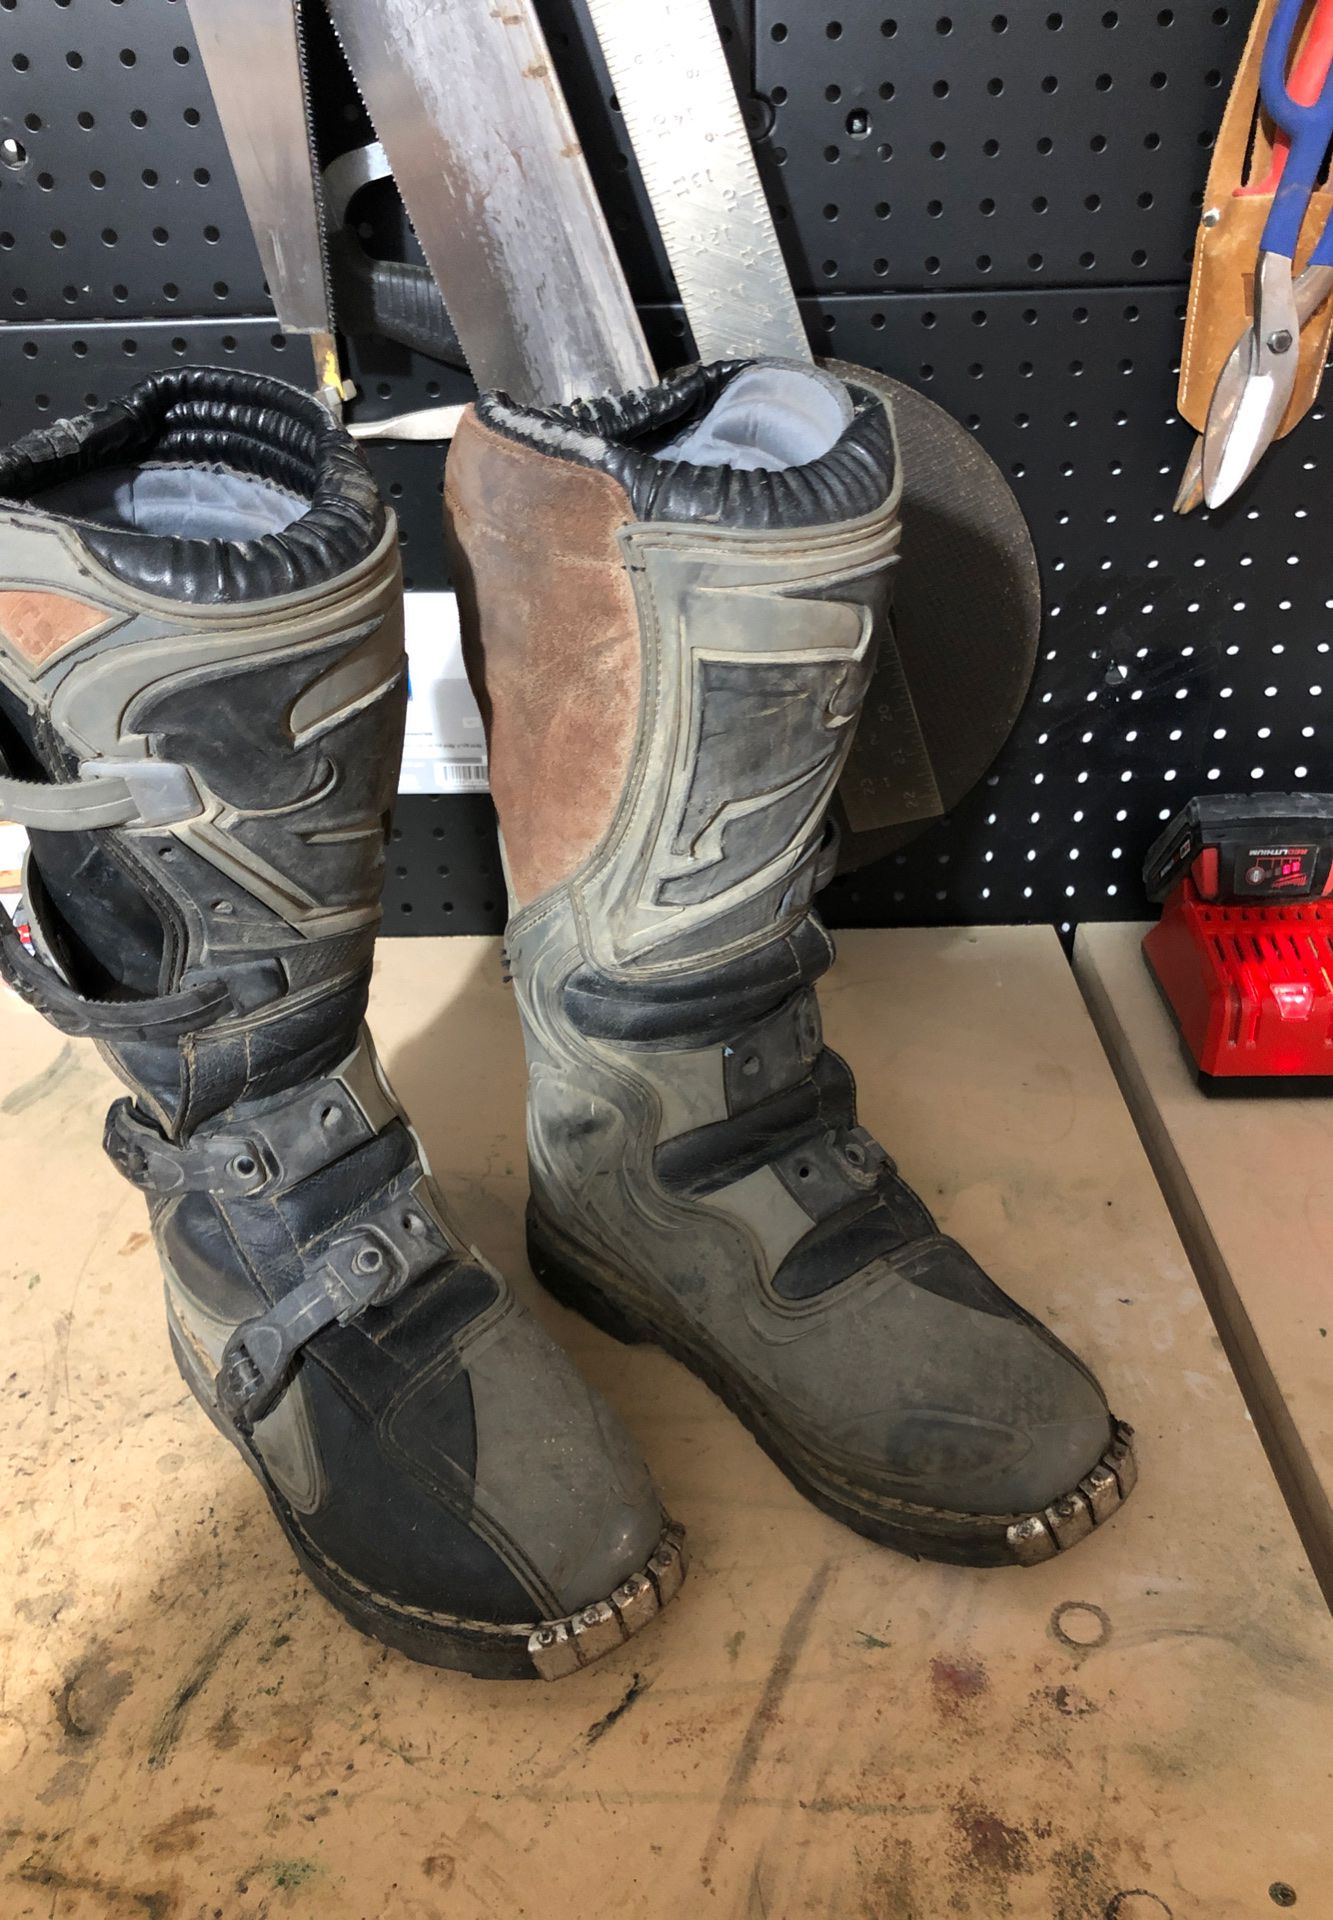 Thor motocross boots. Size 7